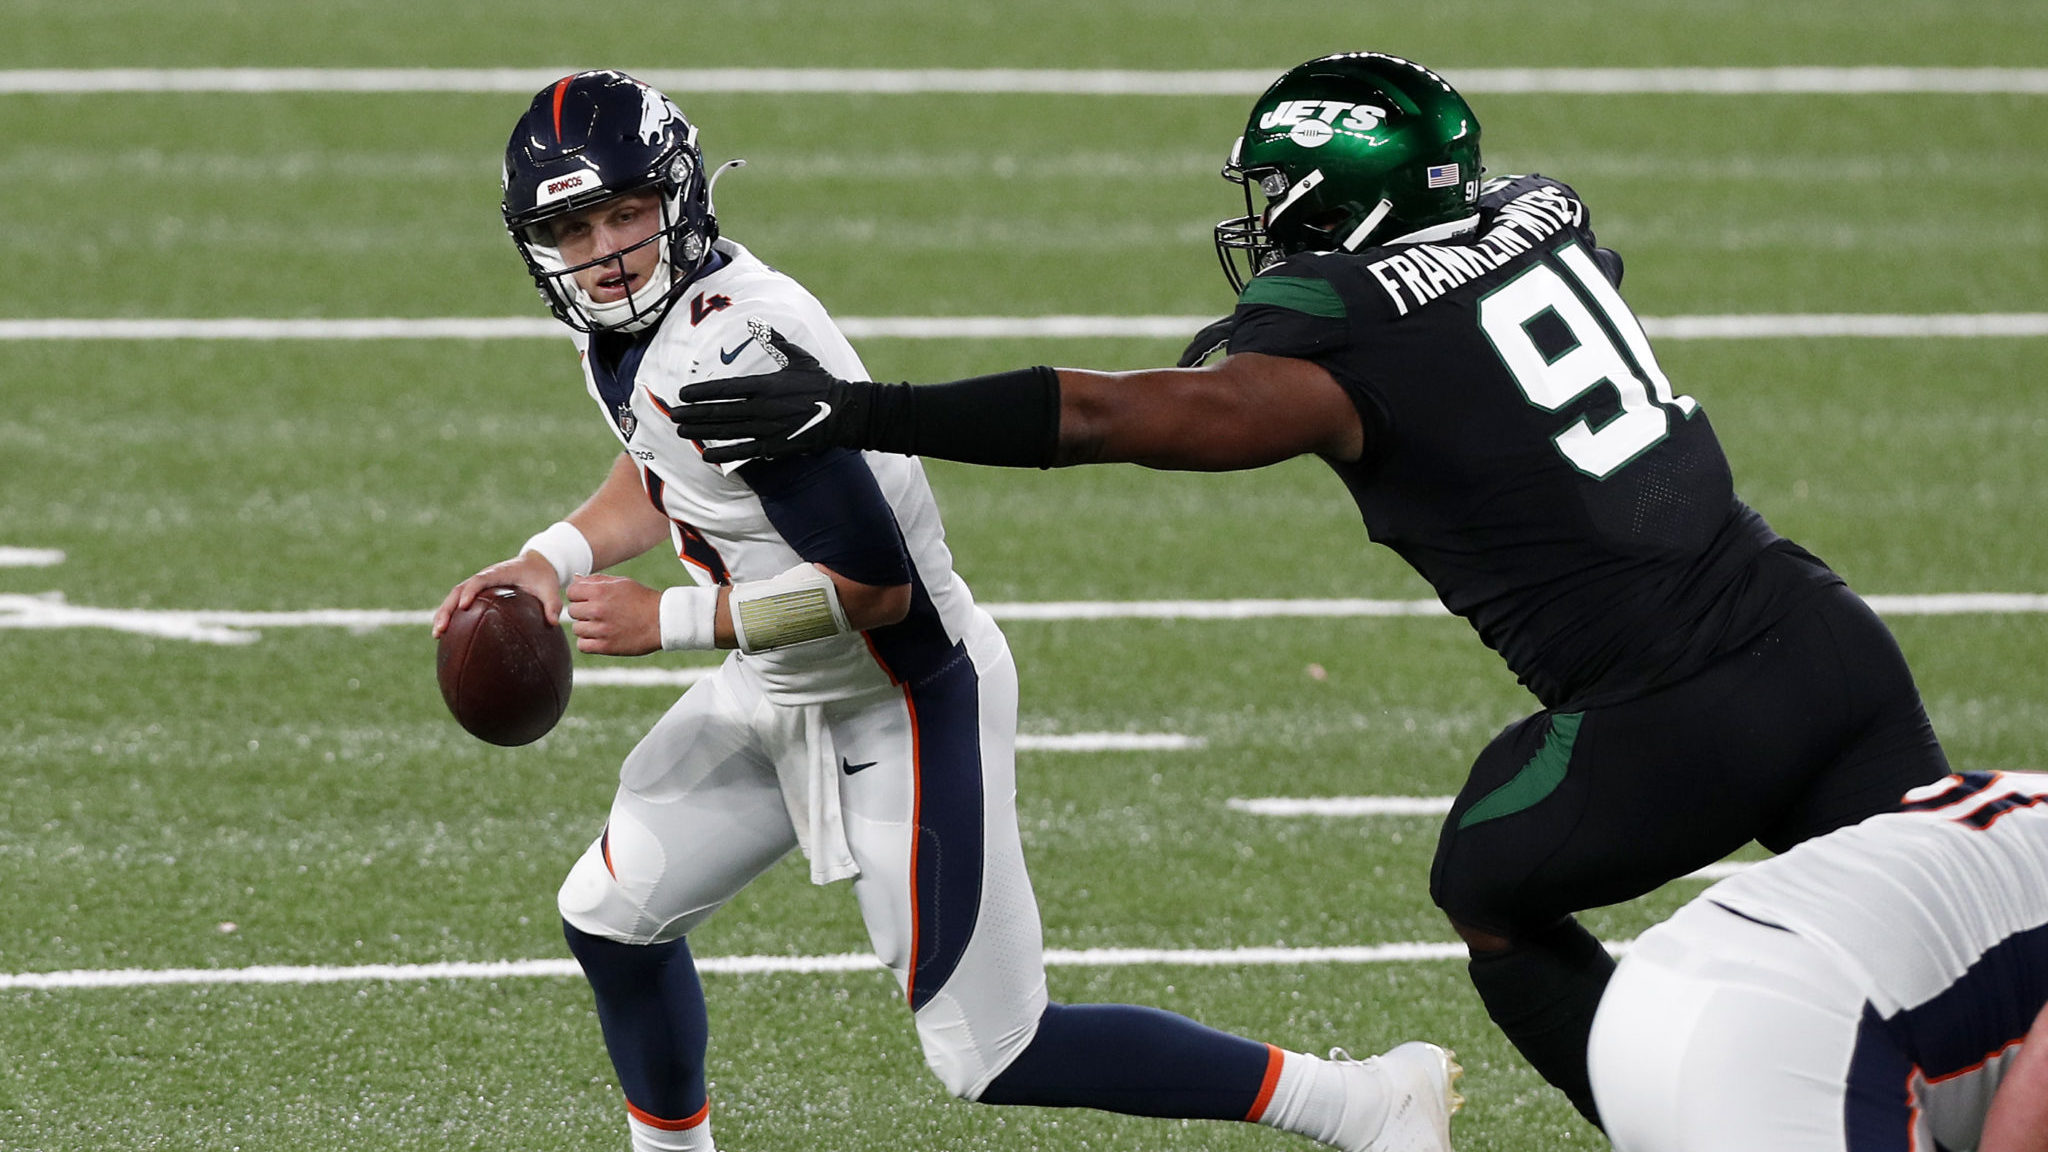 EAST RUTHERFORD, NEW JERSEY - OCTOBER 01: (NEW YORK DAILIES OUT) Brett Rypien #4 of the Denver Broncos in action against John Franklin-Myers #91 of the New York Jets at MetLife Stadium on October 01, 2020 in East Rutherford, New Jersey. The Broncos defeated the Jets 37-28.